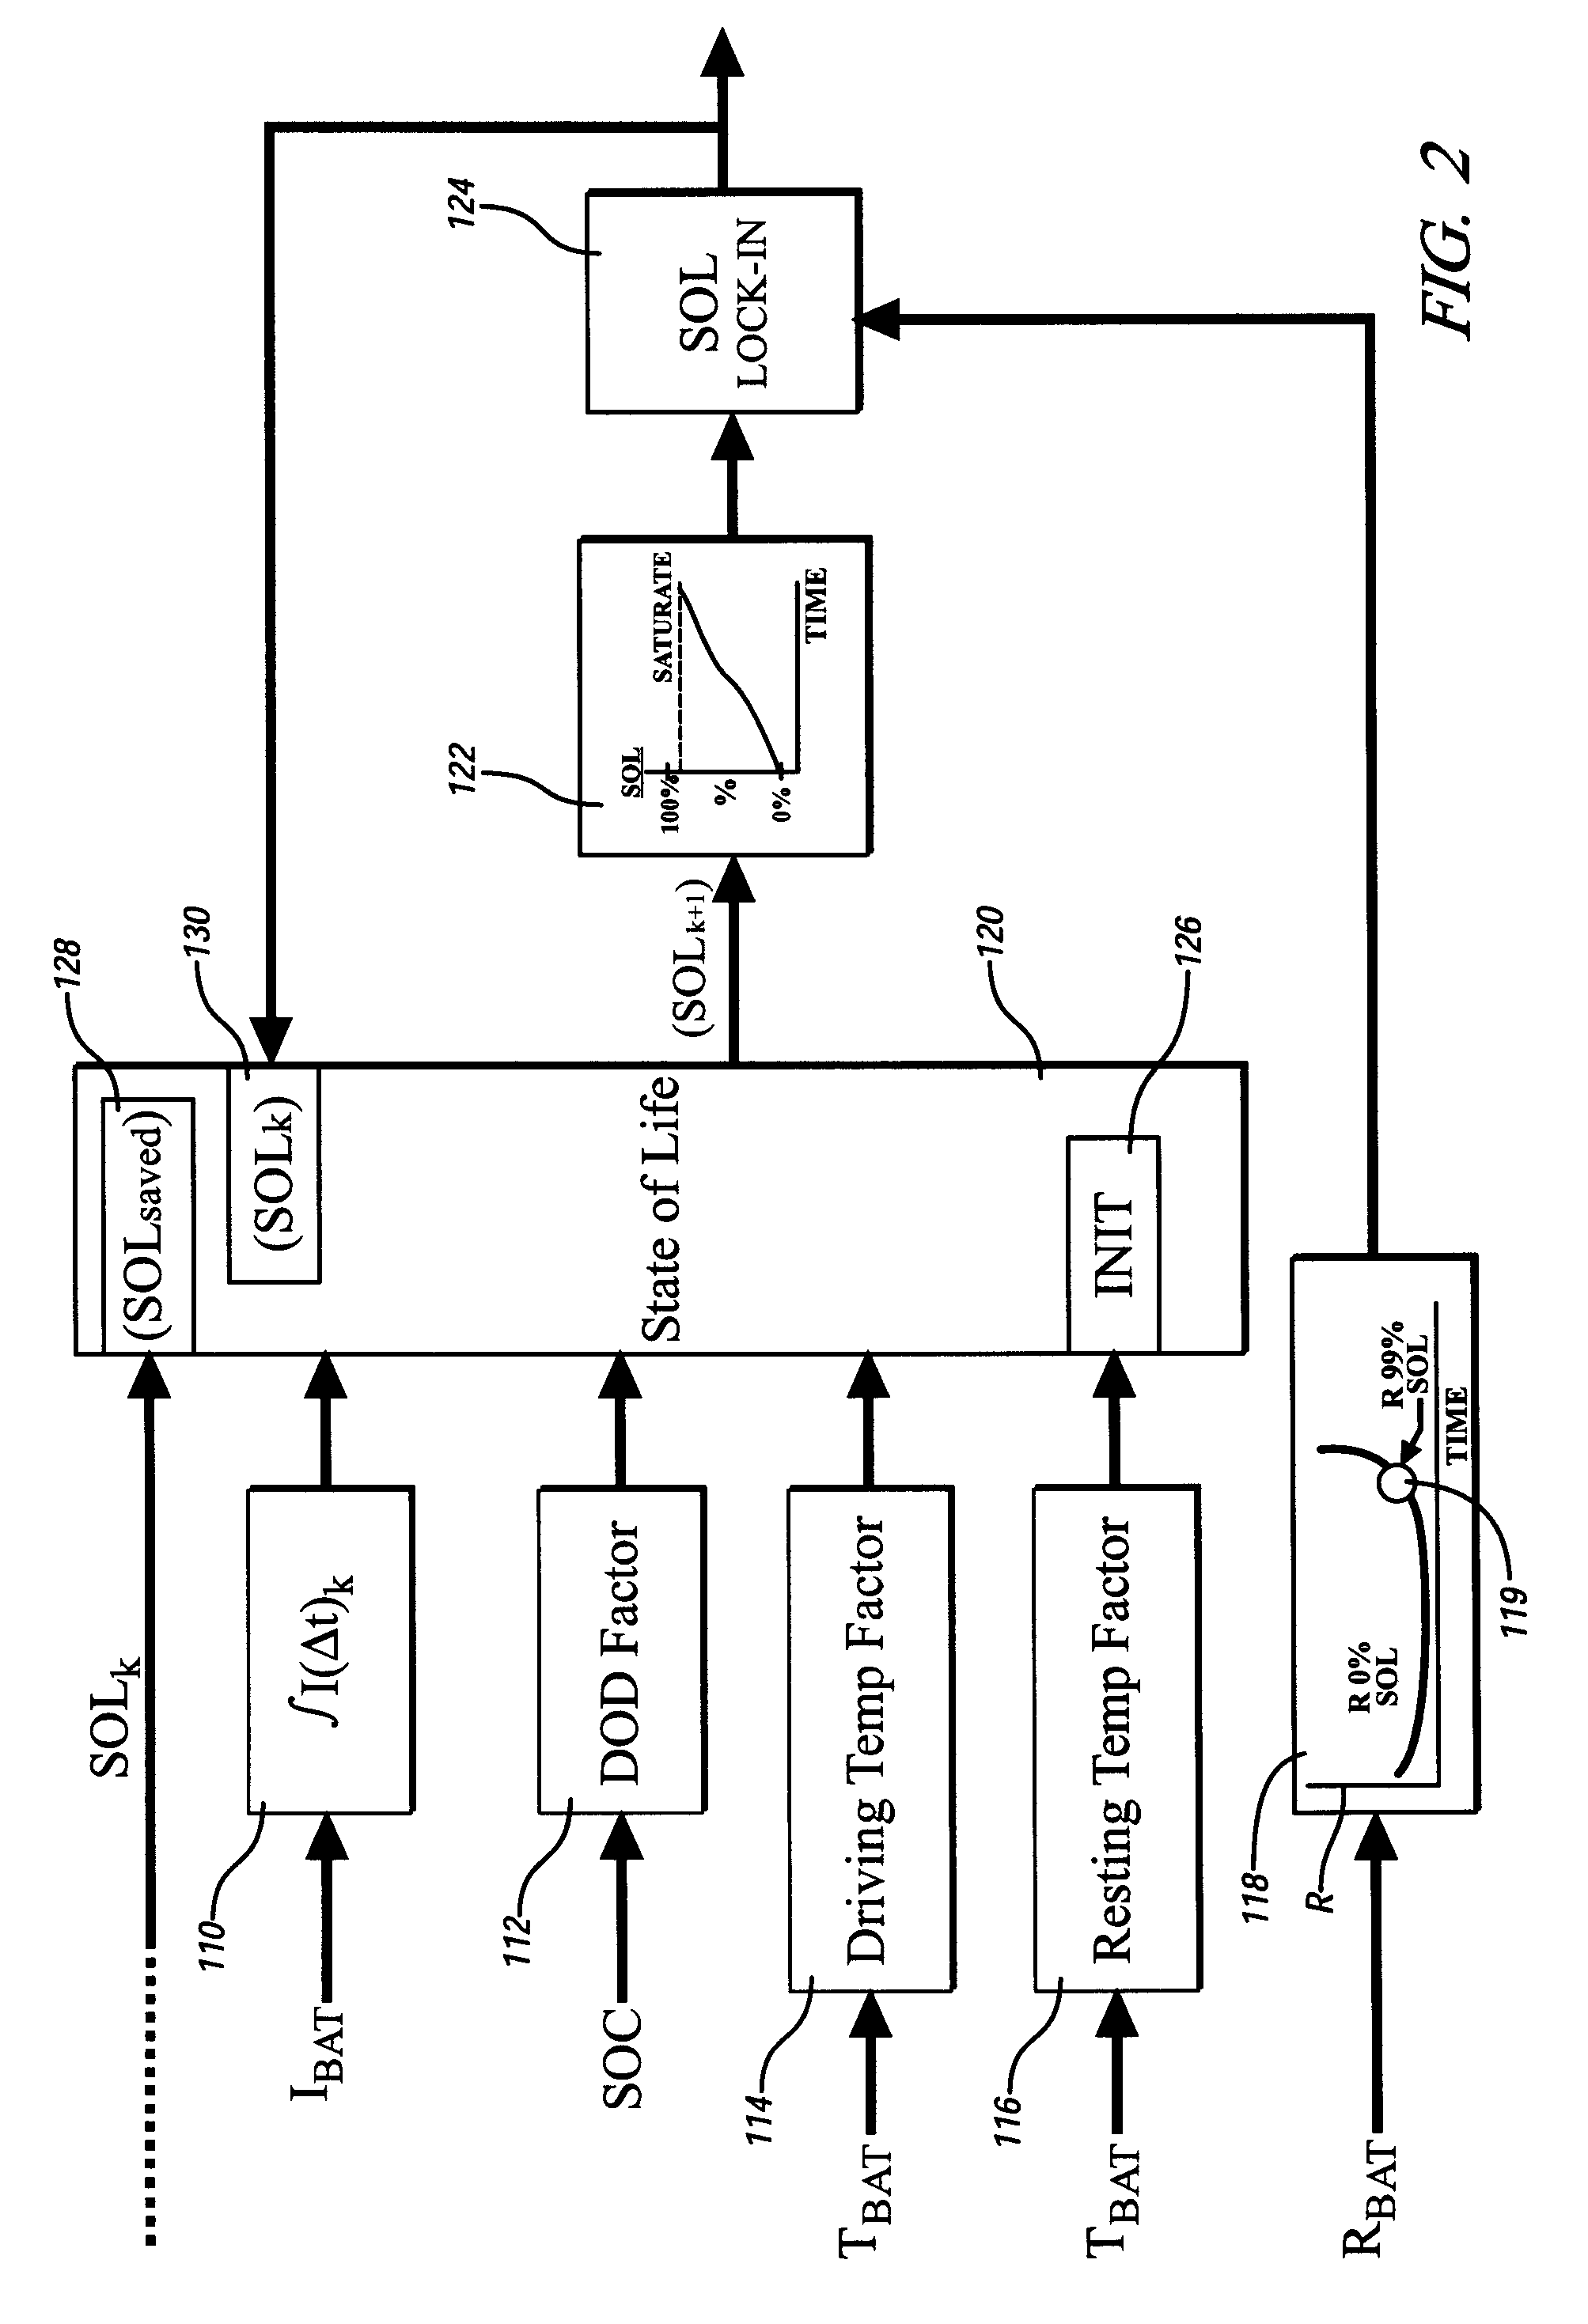 Method for operating a hybrid electric powertrain based on predictive effects upon an electrical energy storage device